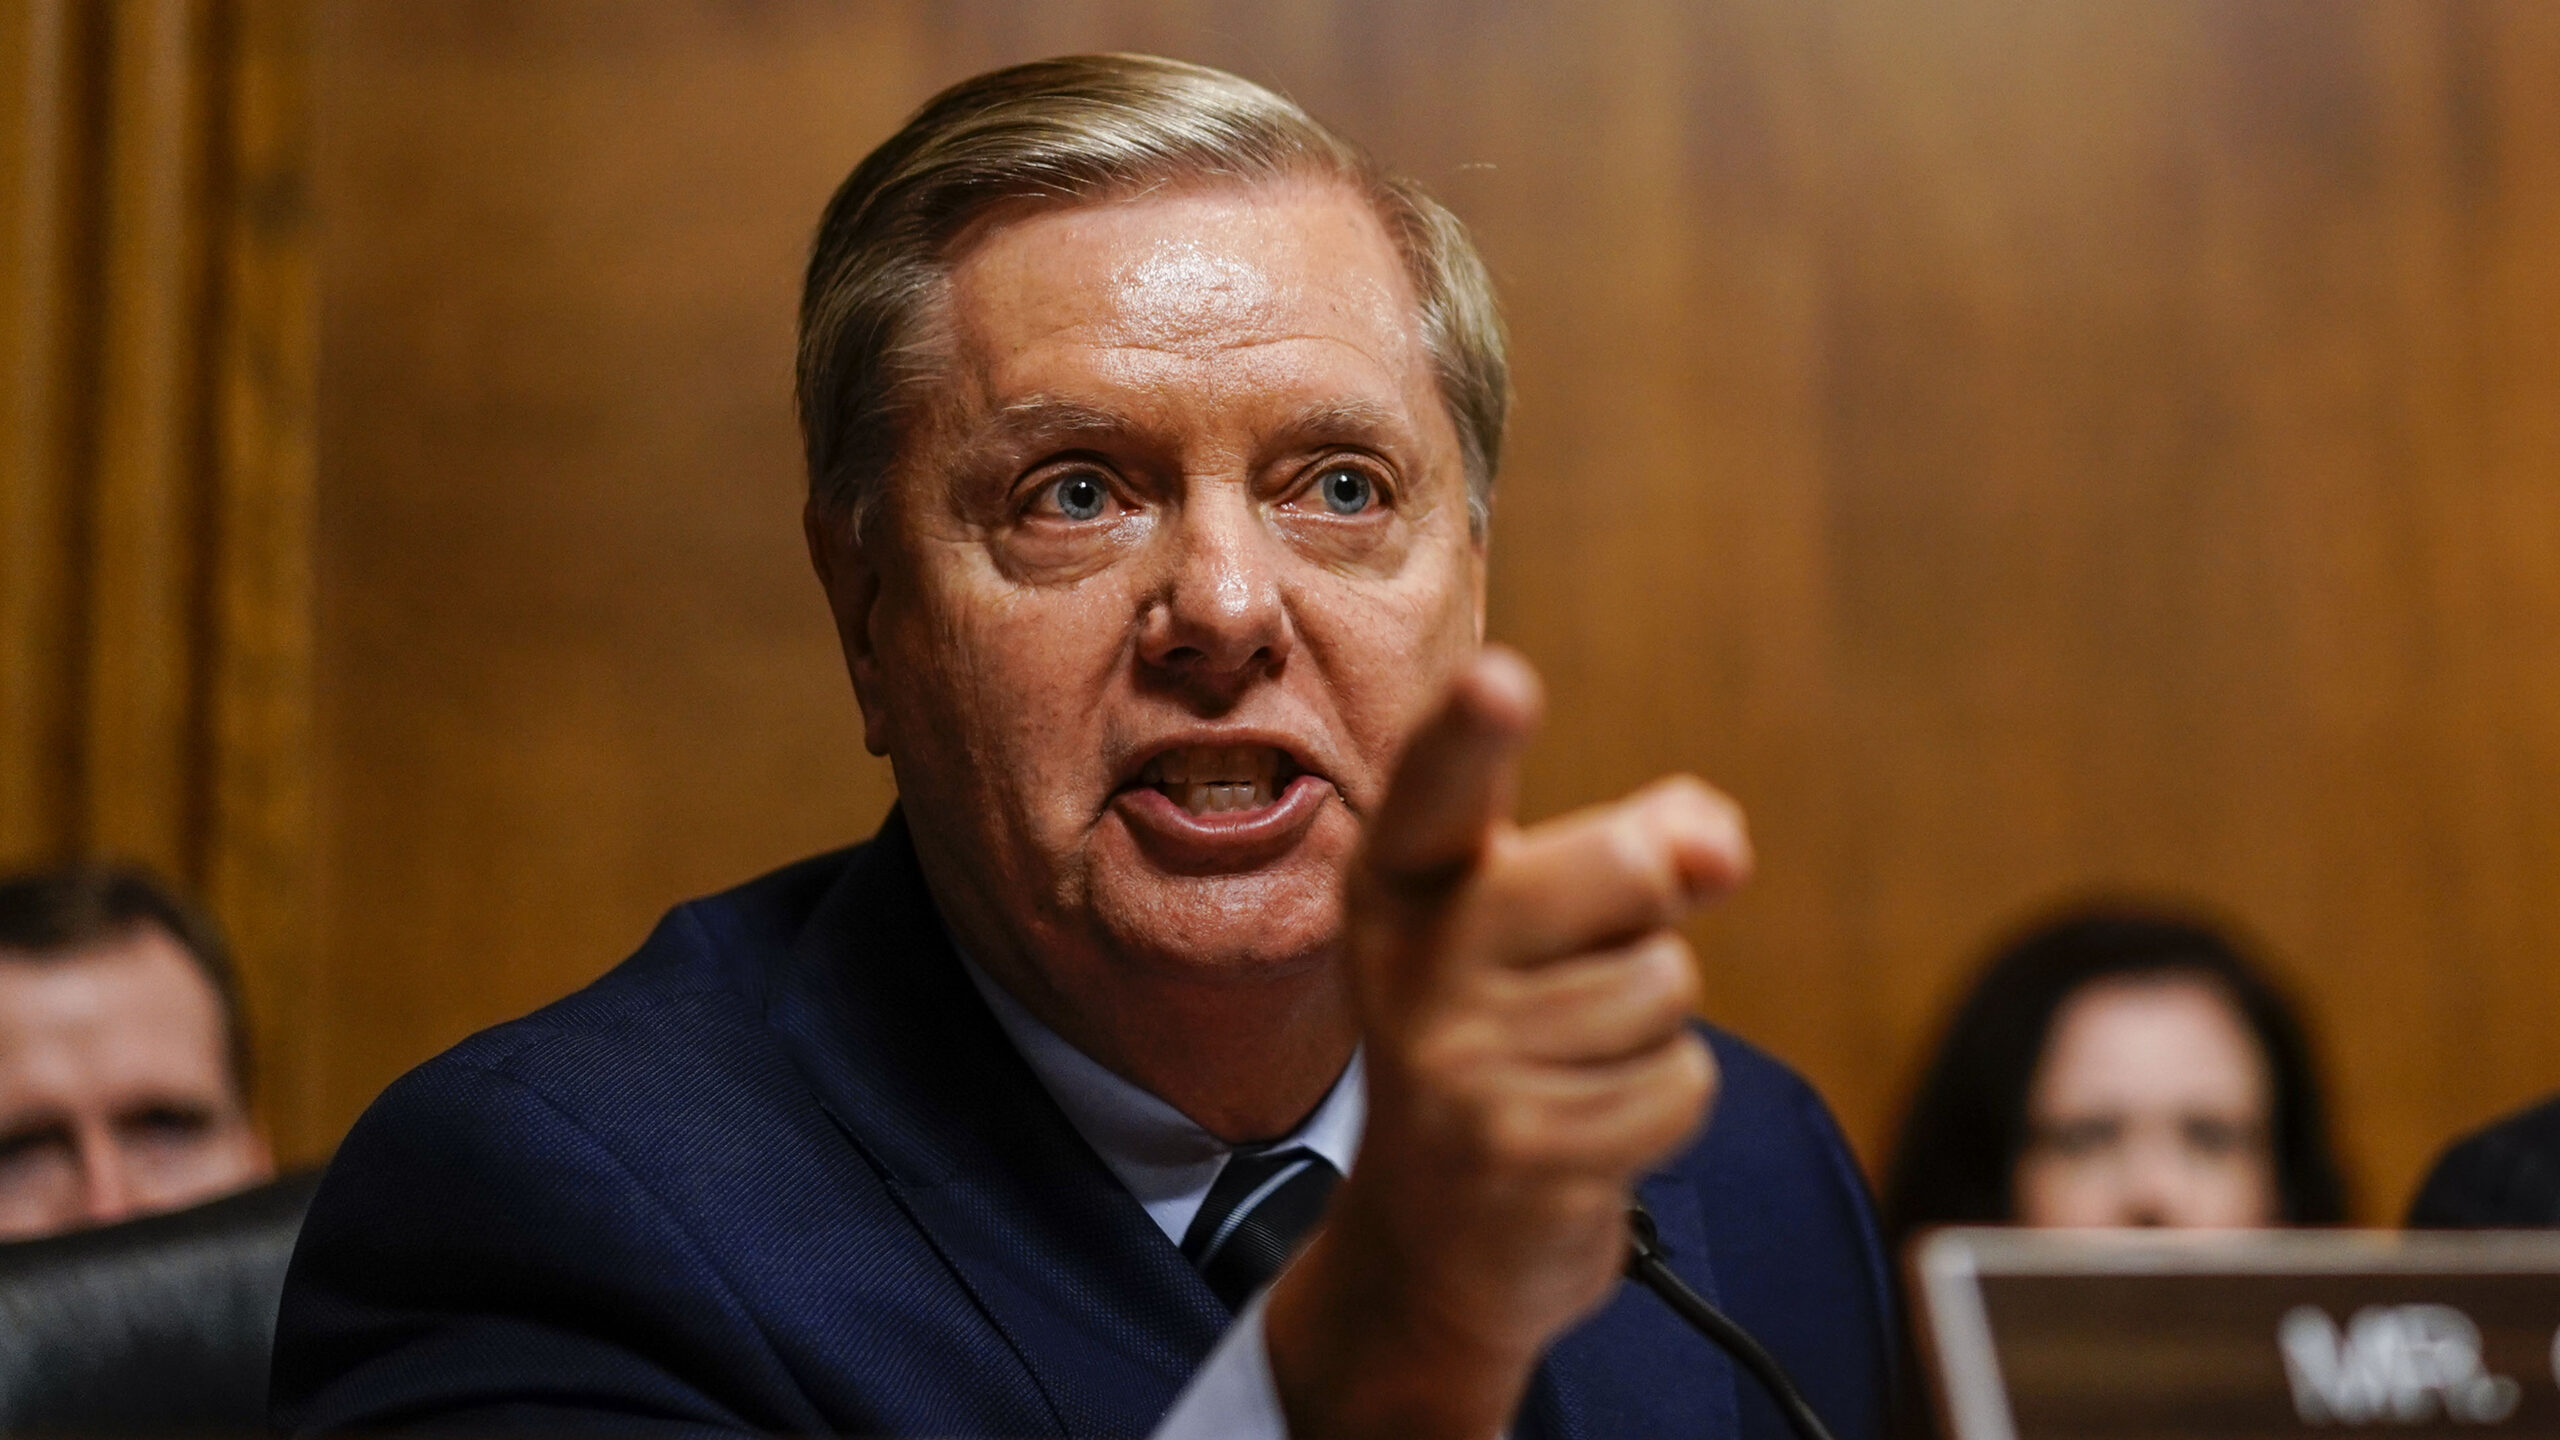 “Enough is enough! Lindsey Graham unleashes fury on CNN host for Democrats’ extreme abortion stance. It’s time to stop making excuses for these guys.”